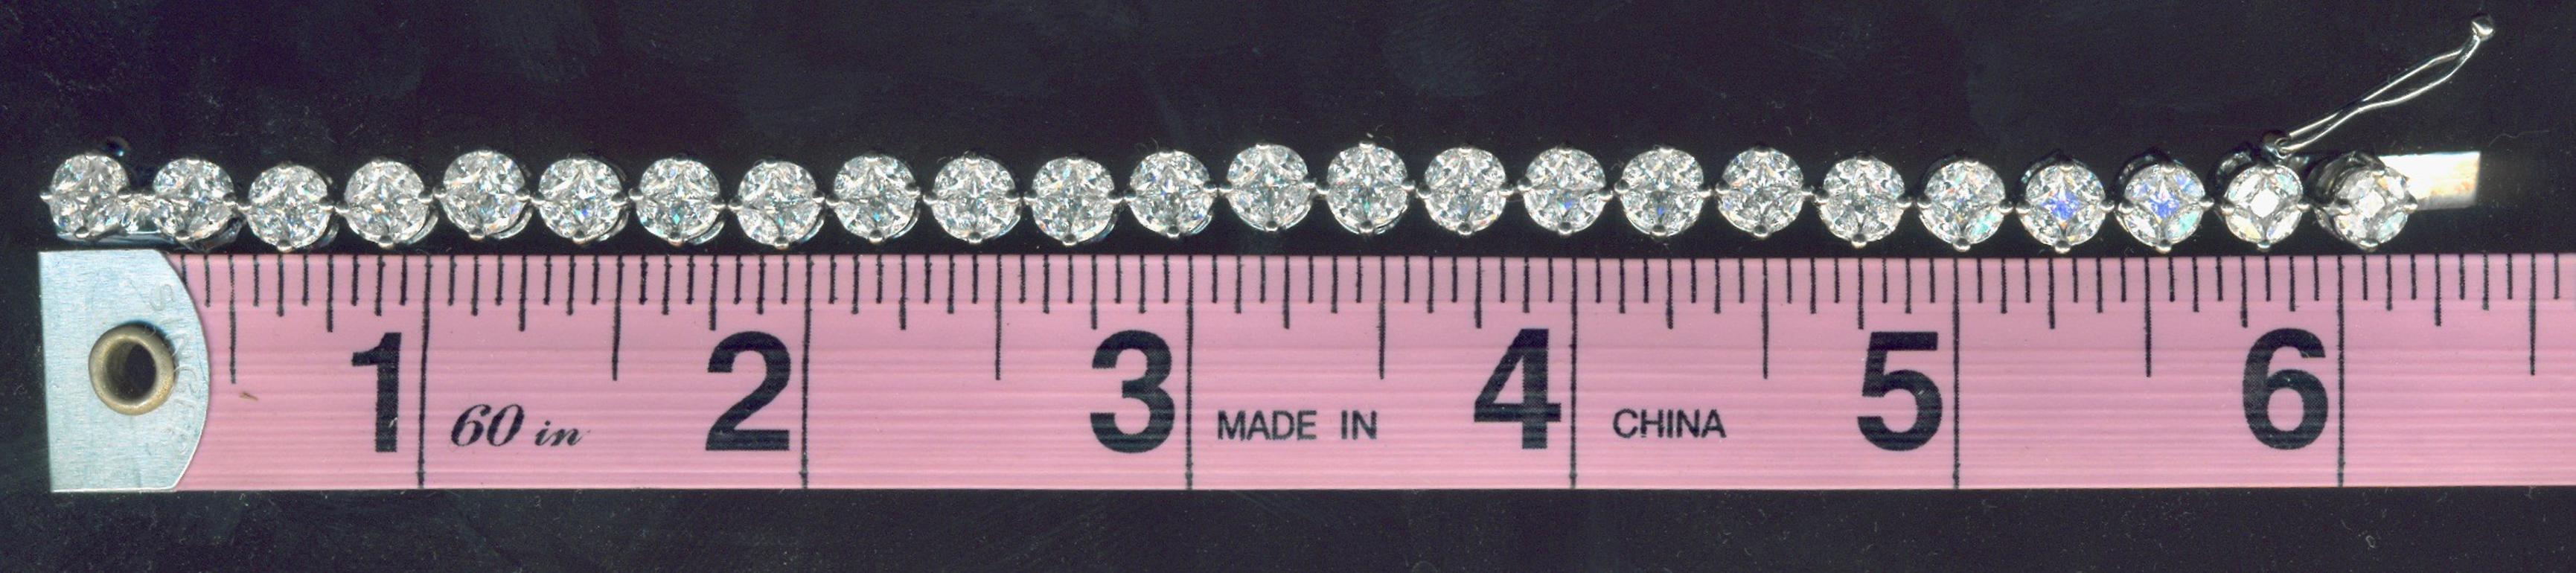 Diamond Tennis Bracelet in Platinum and White Gold 7.20 Carat Petite Size In Good Condition For Sale In Wailea, HI